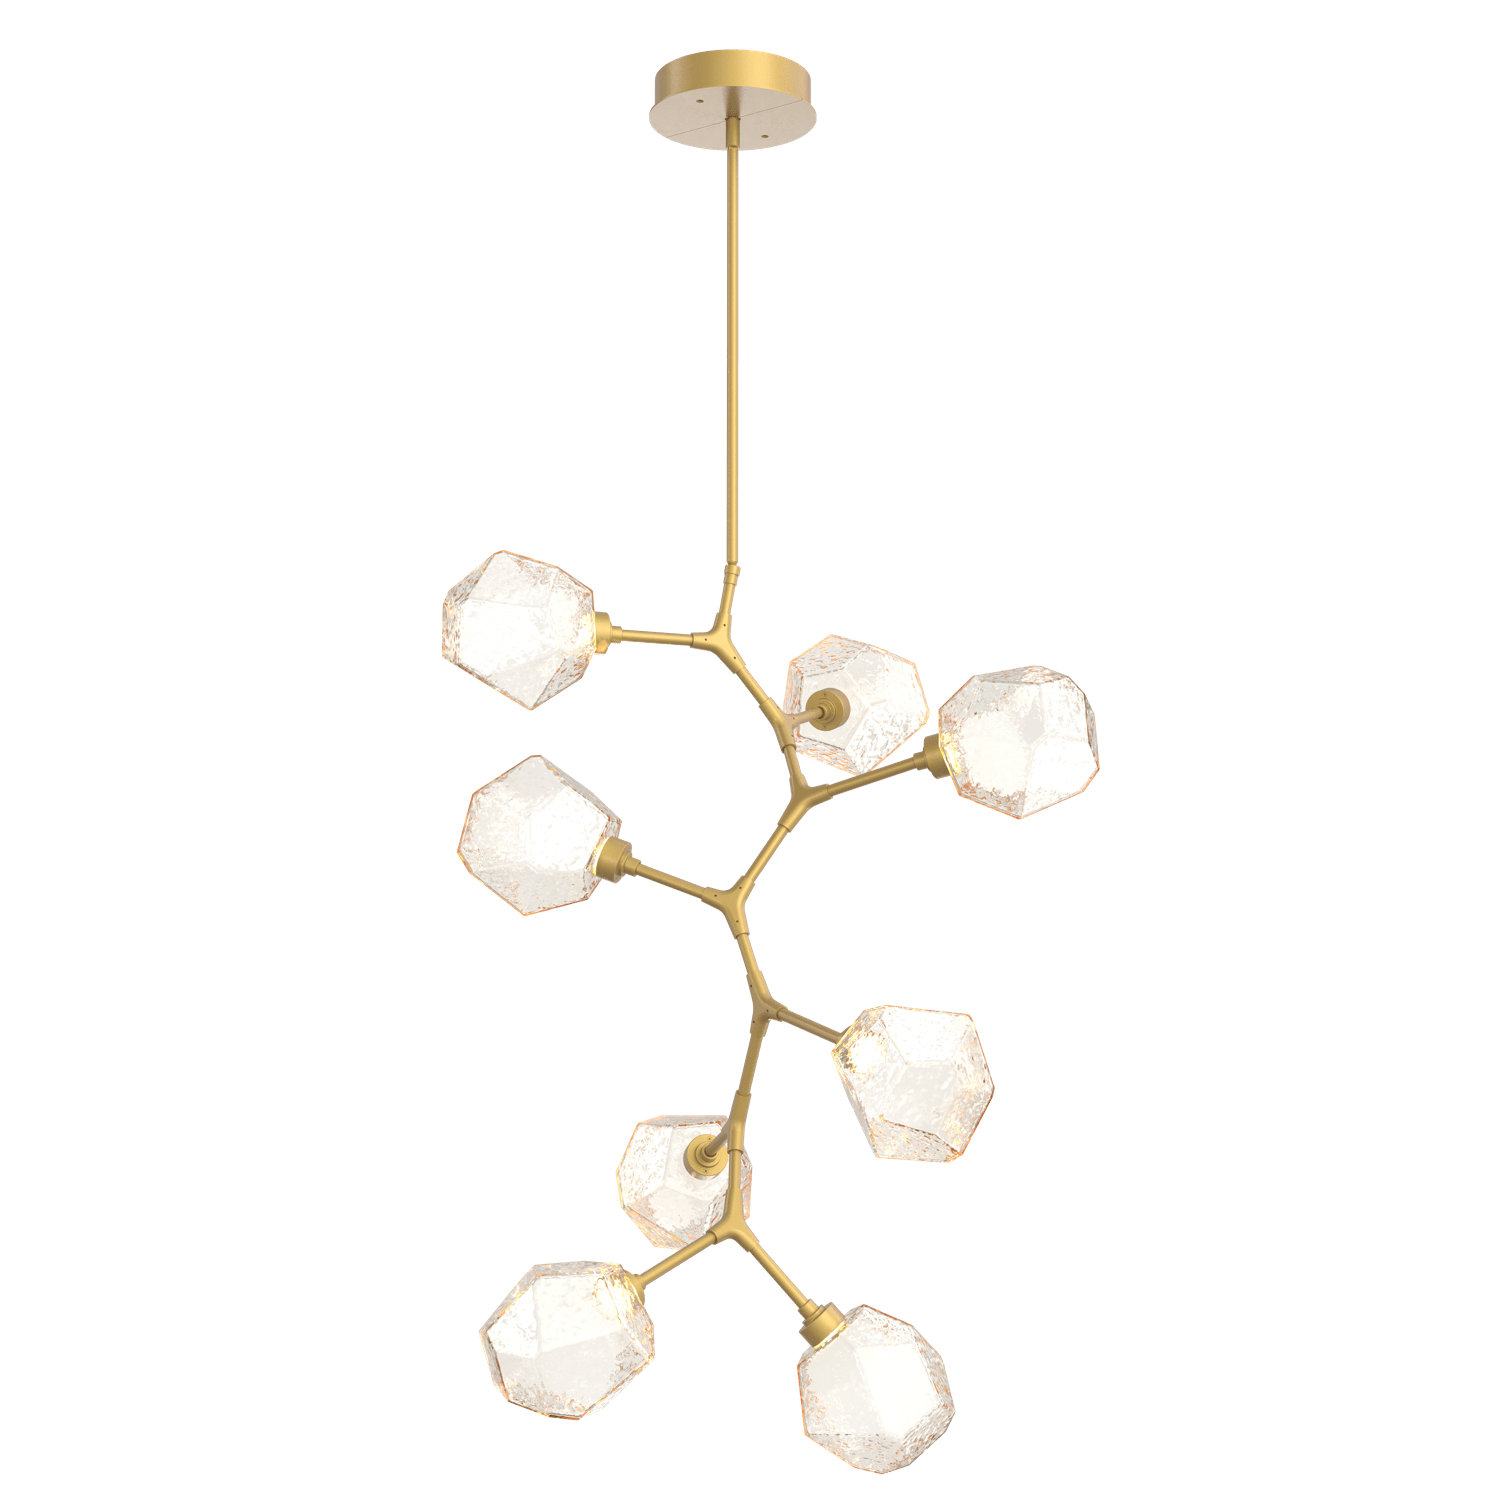 CHB0039-VB-GB-A-Hammerton-Studio-Gem-8-light-modern-vine-chandelier-with-gilded-brass-finish-and-amber-blown-glass-shades-and-LED-lamping